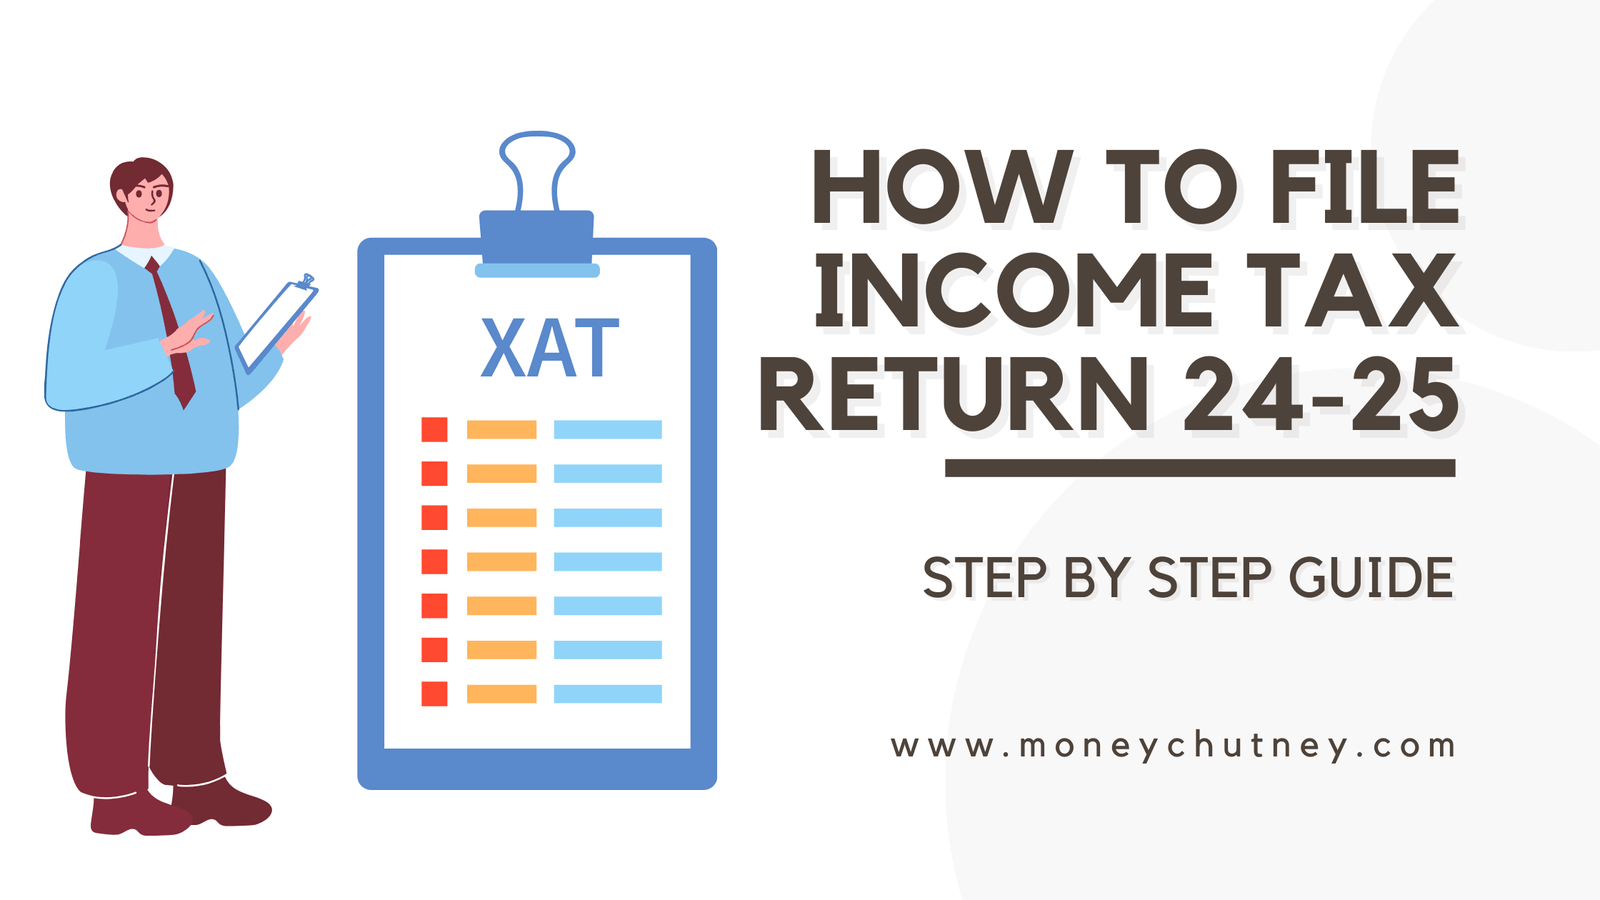 Master Your Taxes: The Ultimate Step-by-Step Guide to Filing Your Income Tax Return for FY 2023-24